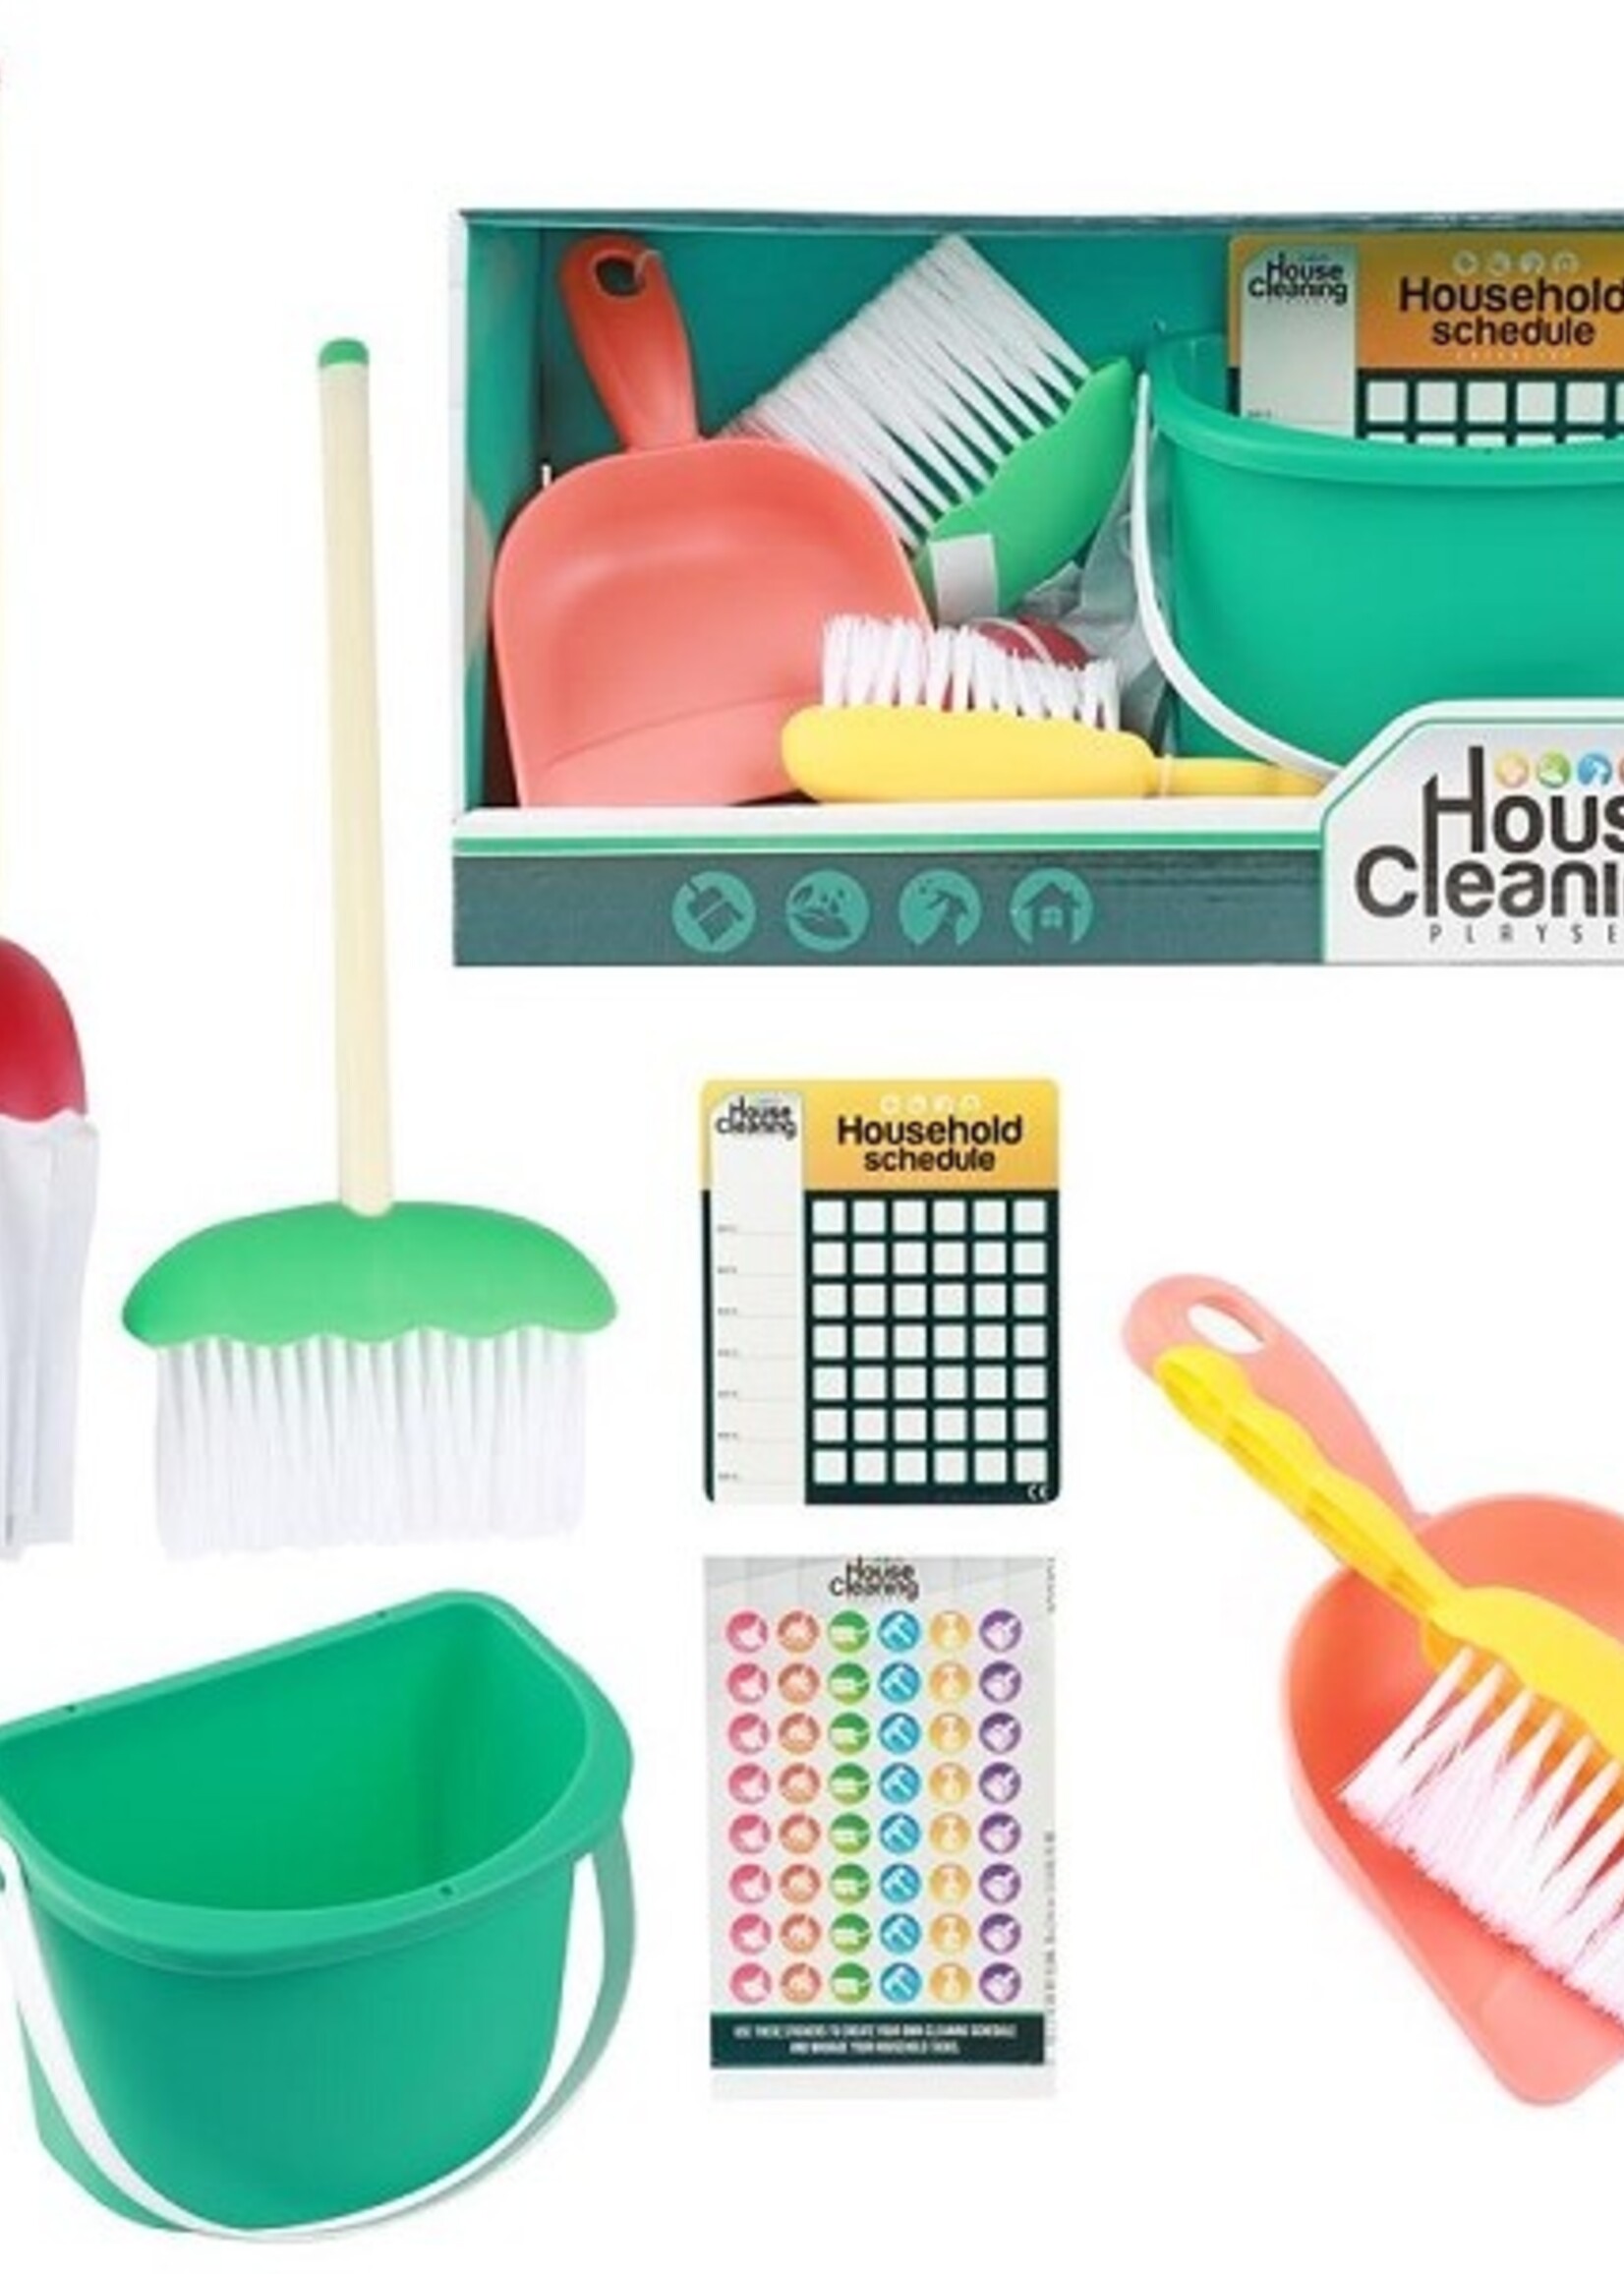 Toi Toys House Cleaning Schoonmaakset 7-delig